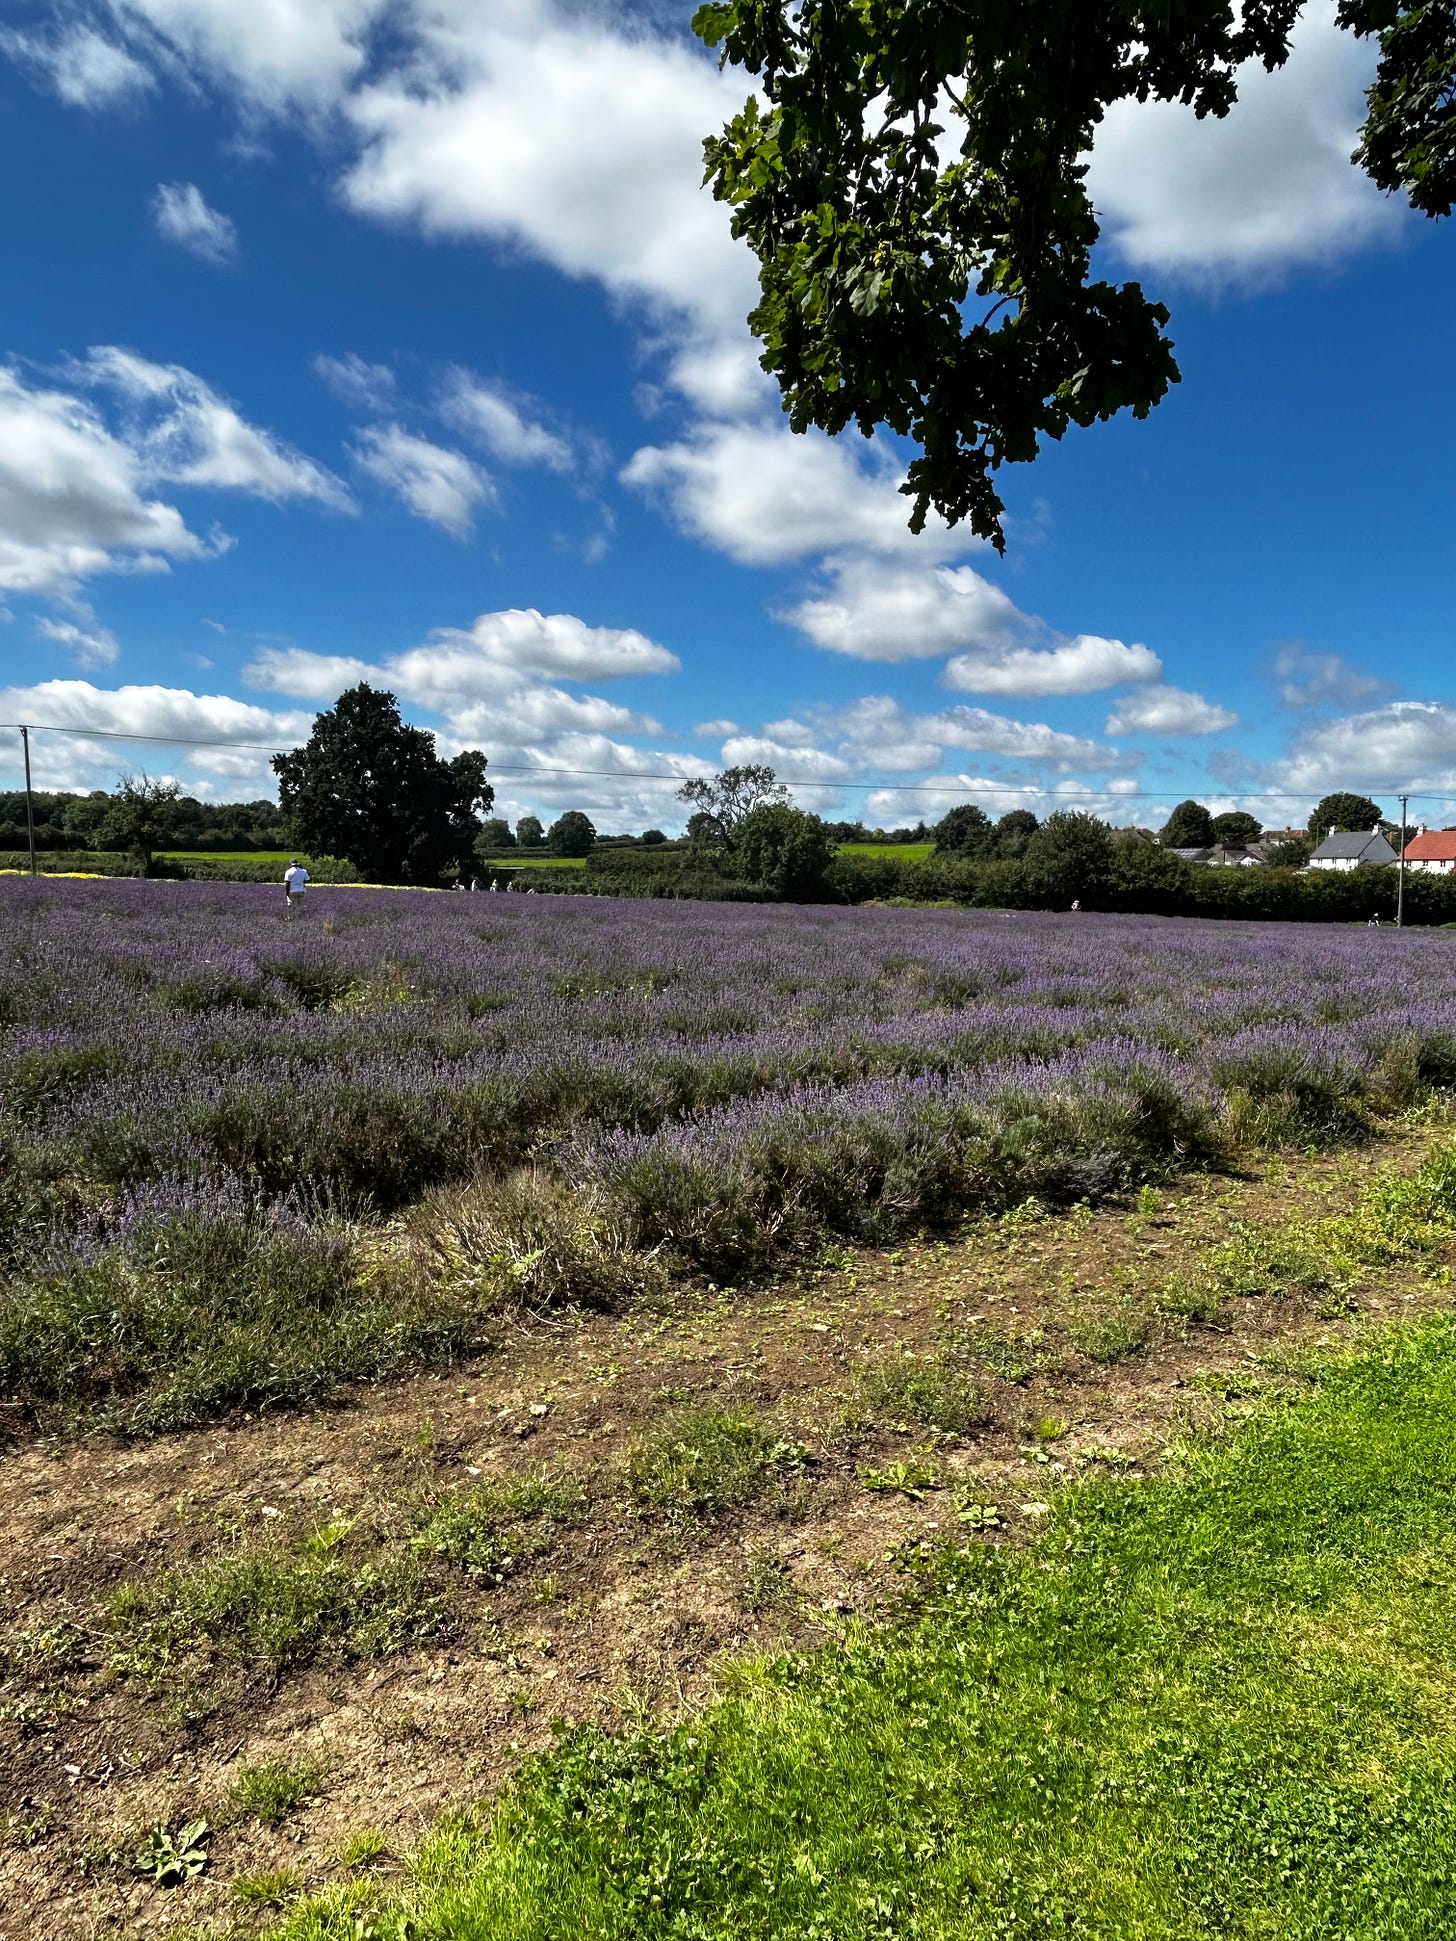 A field of lavender at the Somerset Lavender Farm, Faulkland. Image: Roland's Travels